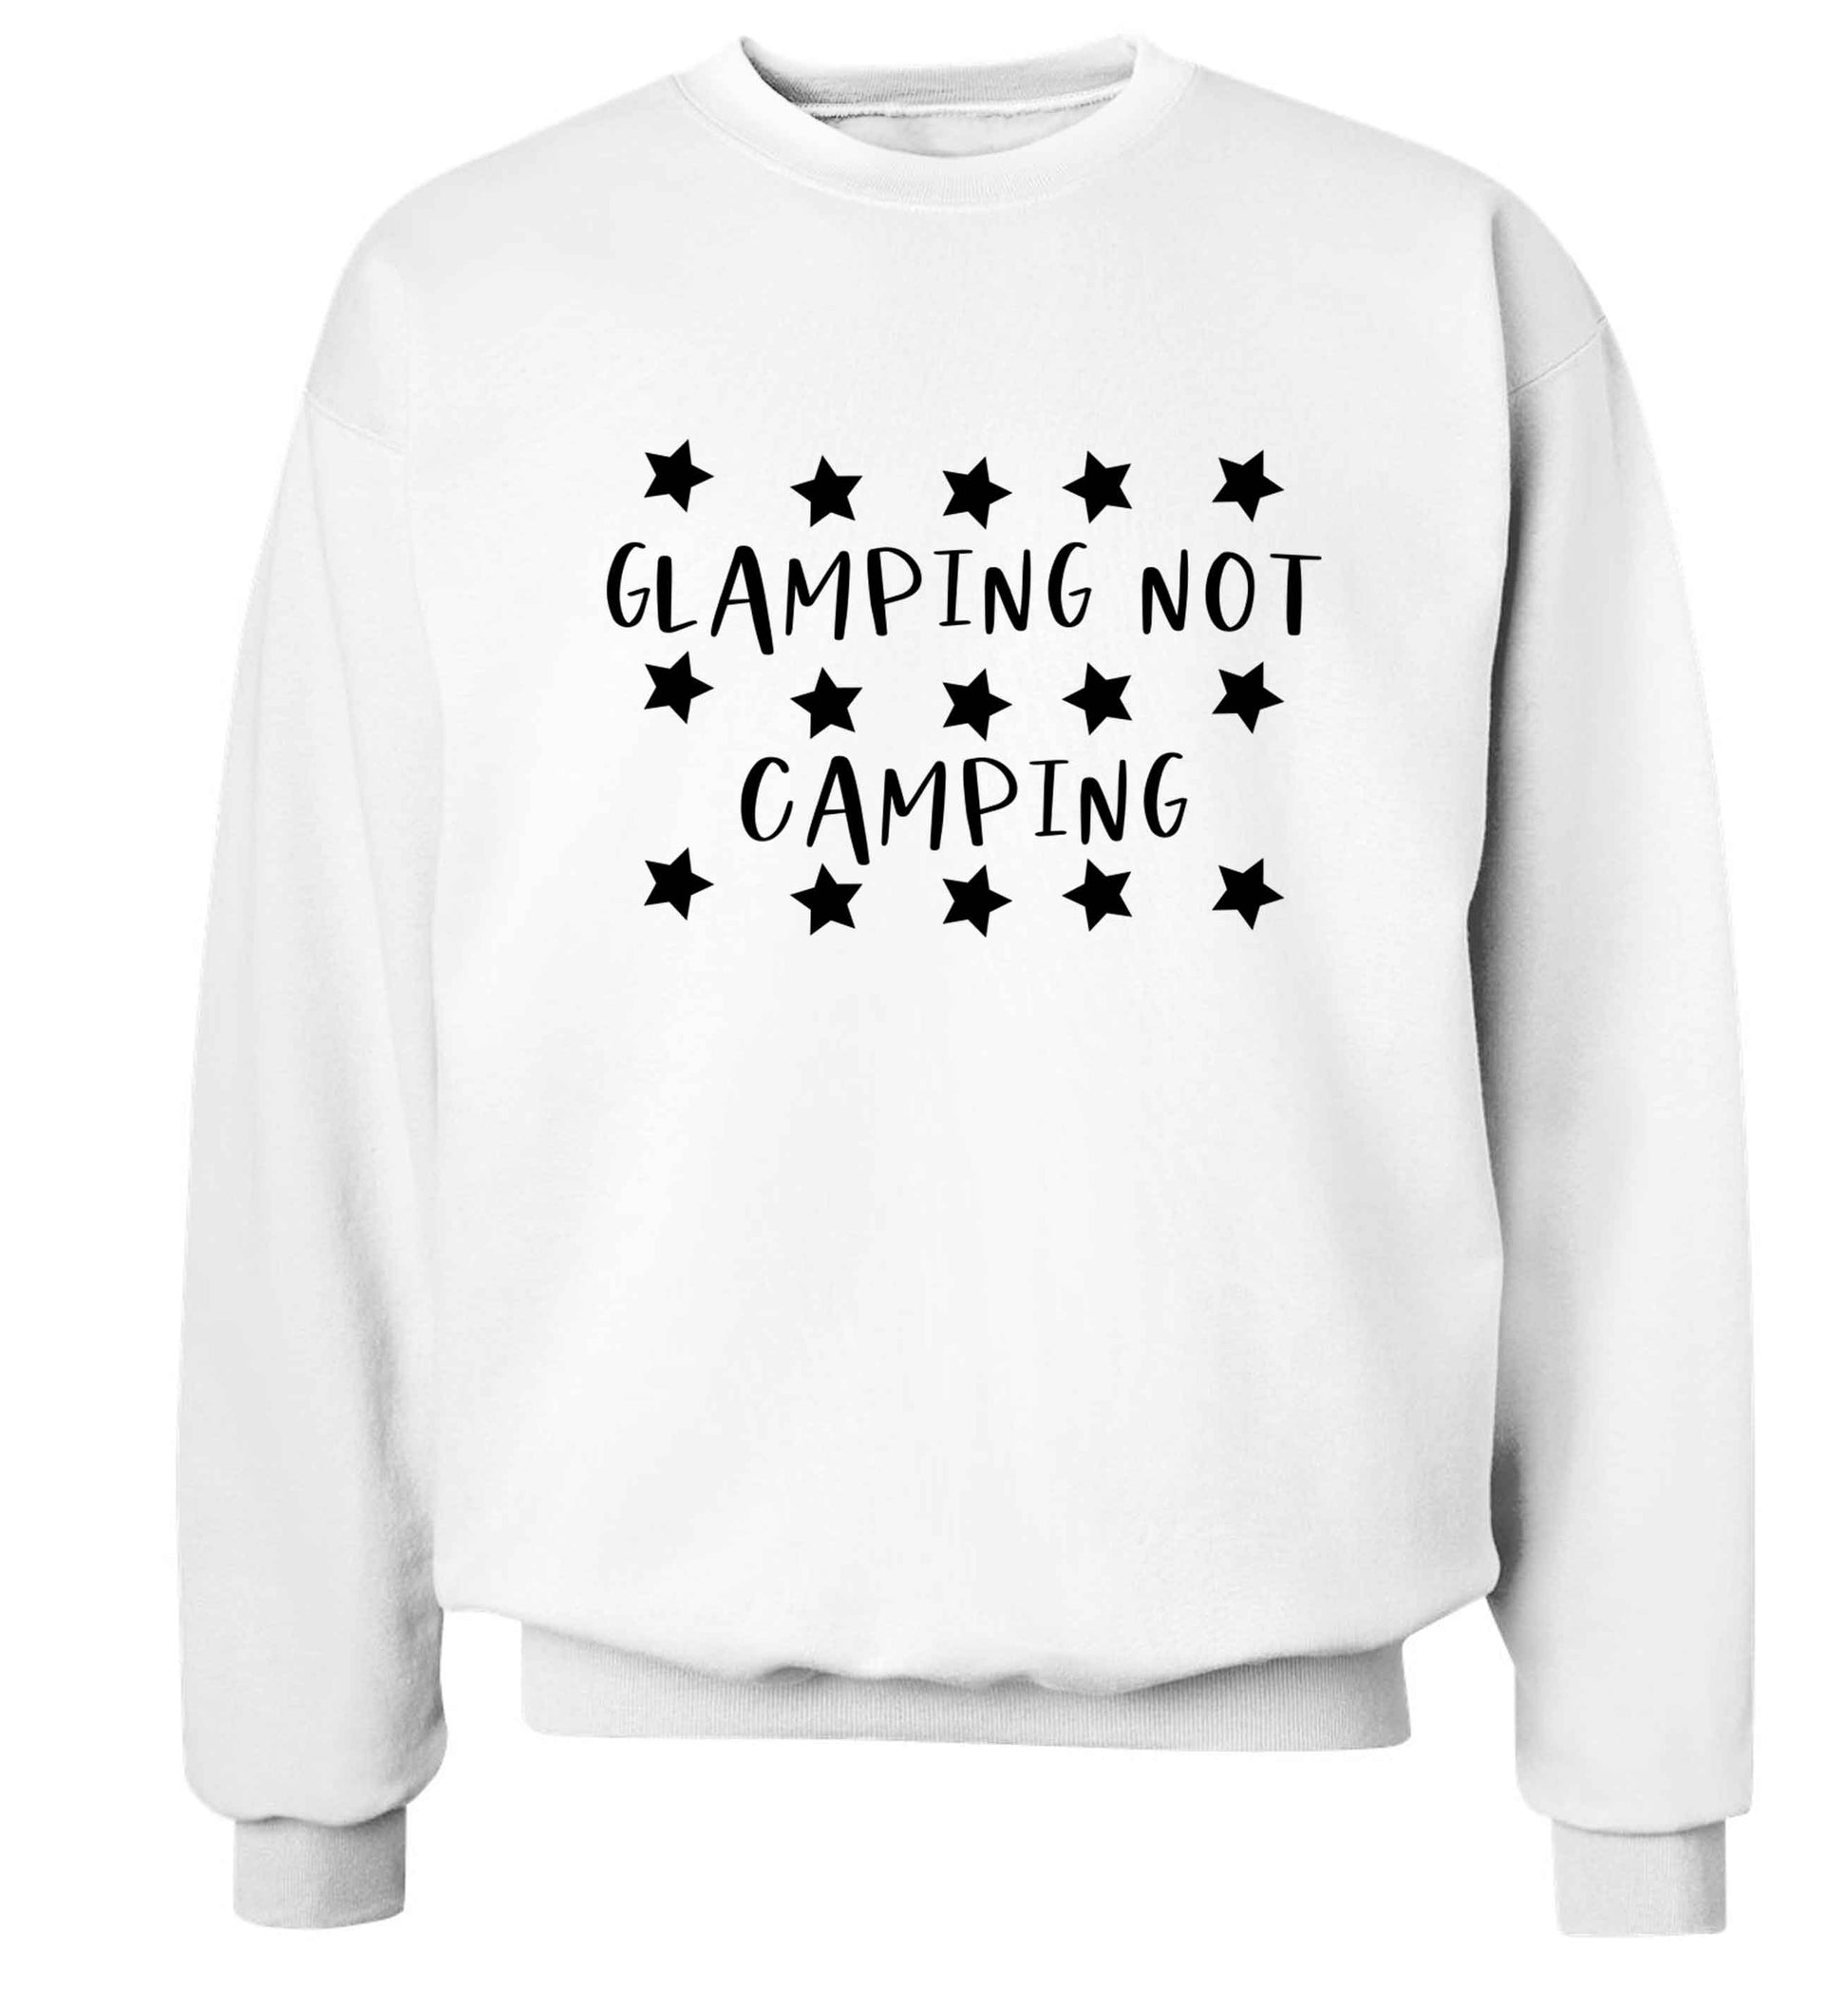 Glamping not camping Adult's unisex white Sweater 2XL